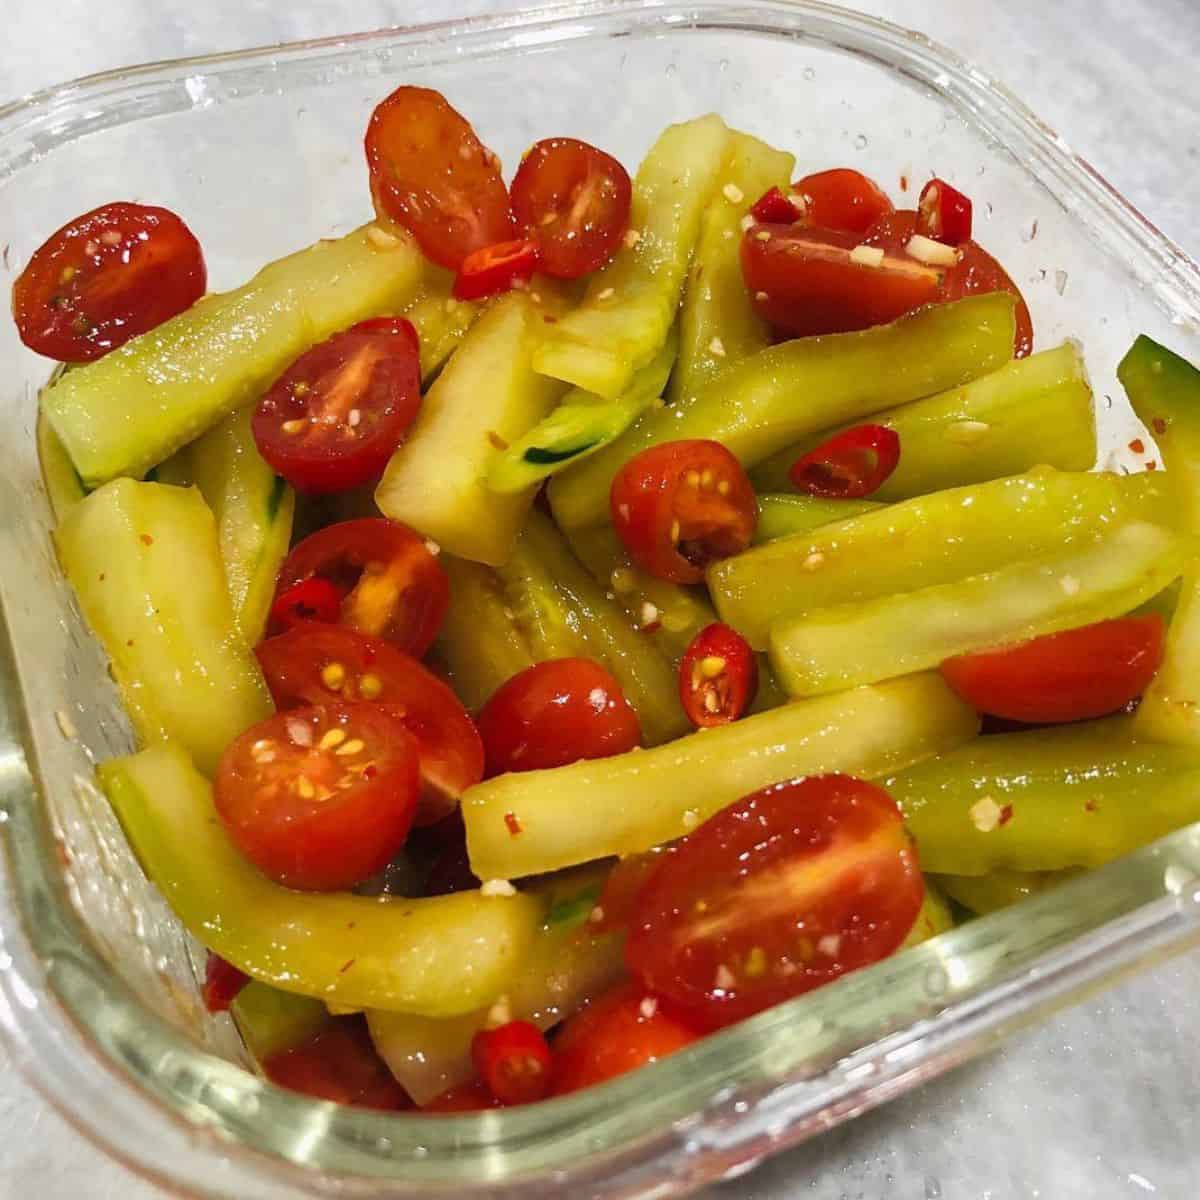 Delicious slices of green veggie with cherry tomatoes